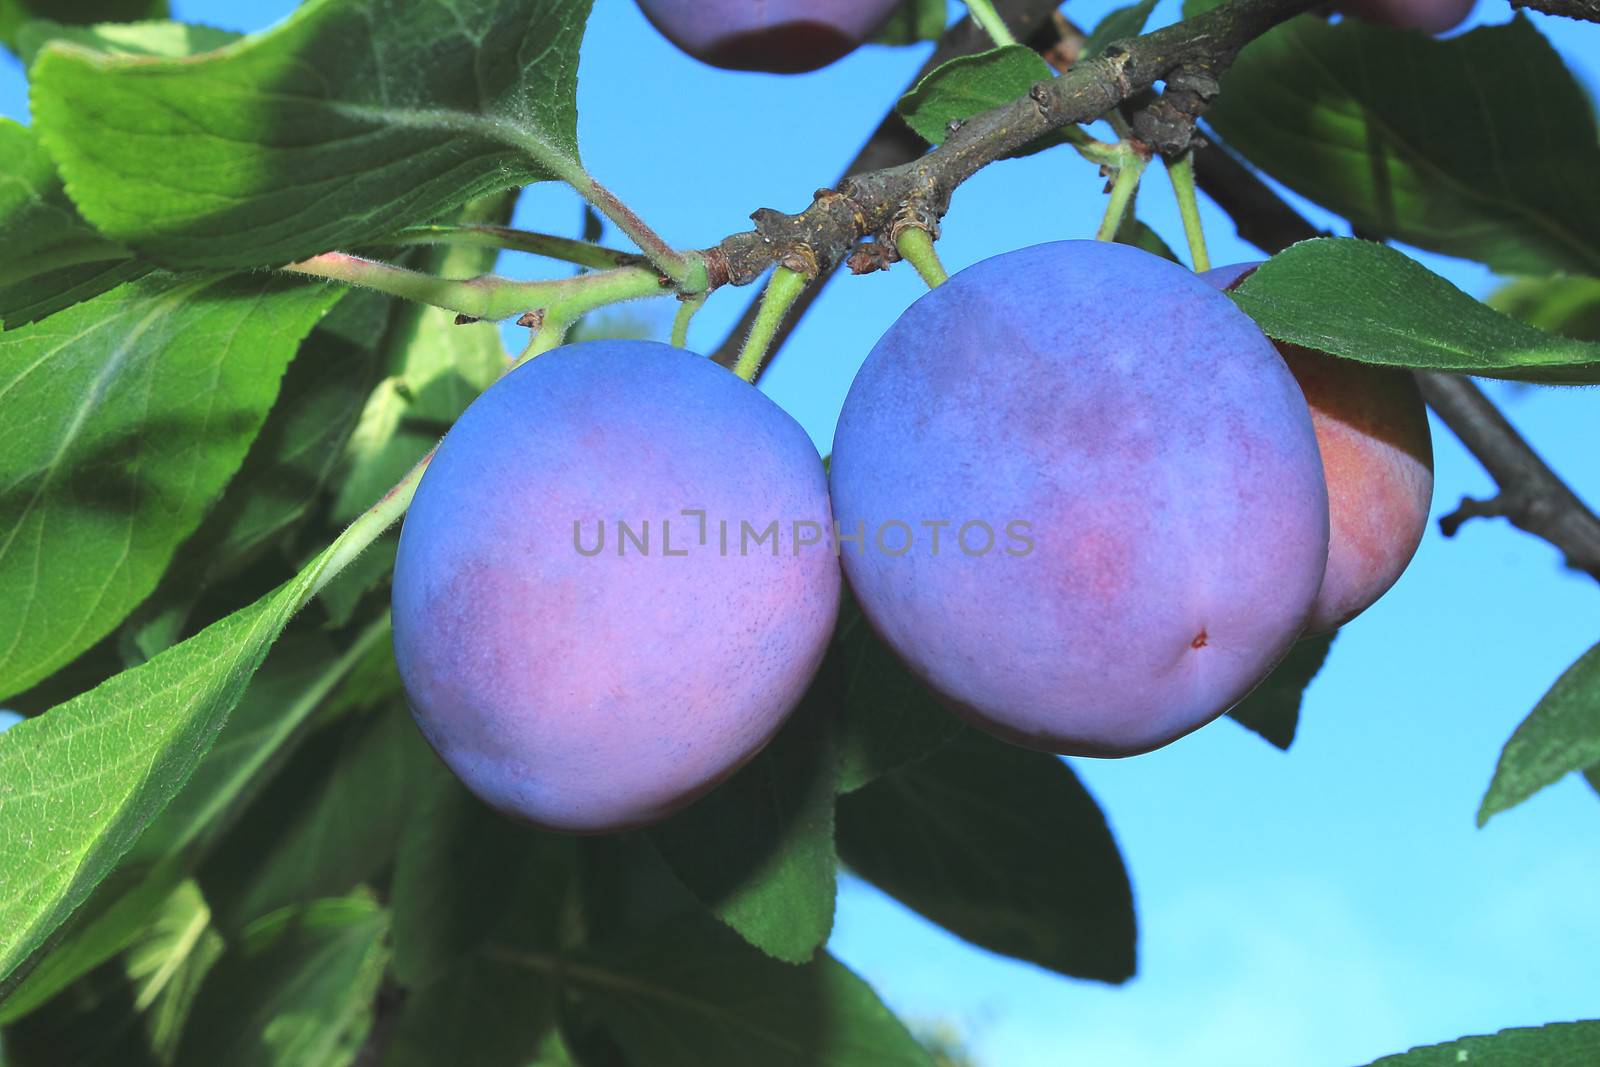 Large ripe plums on a tree branch against the blue sky. by georgina198